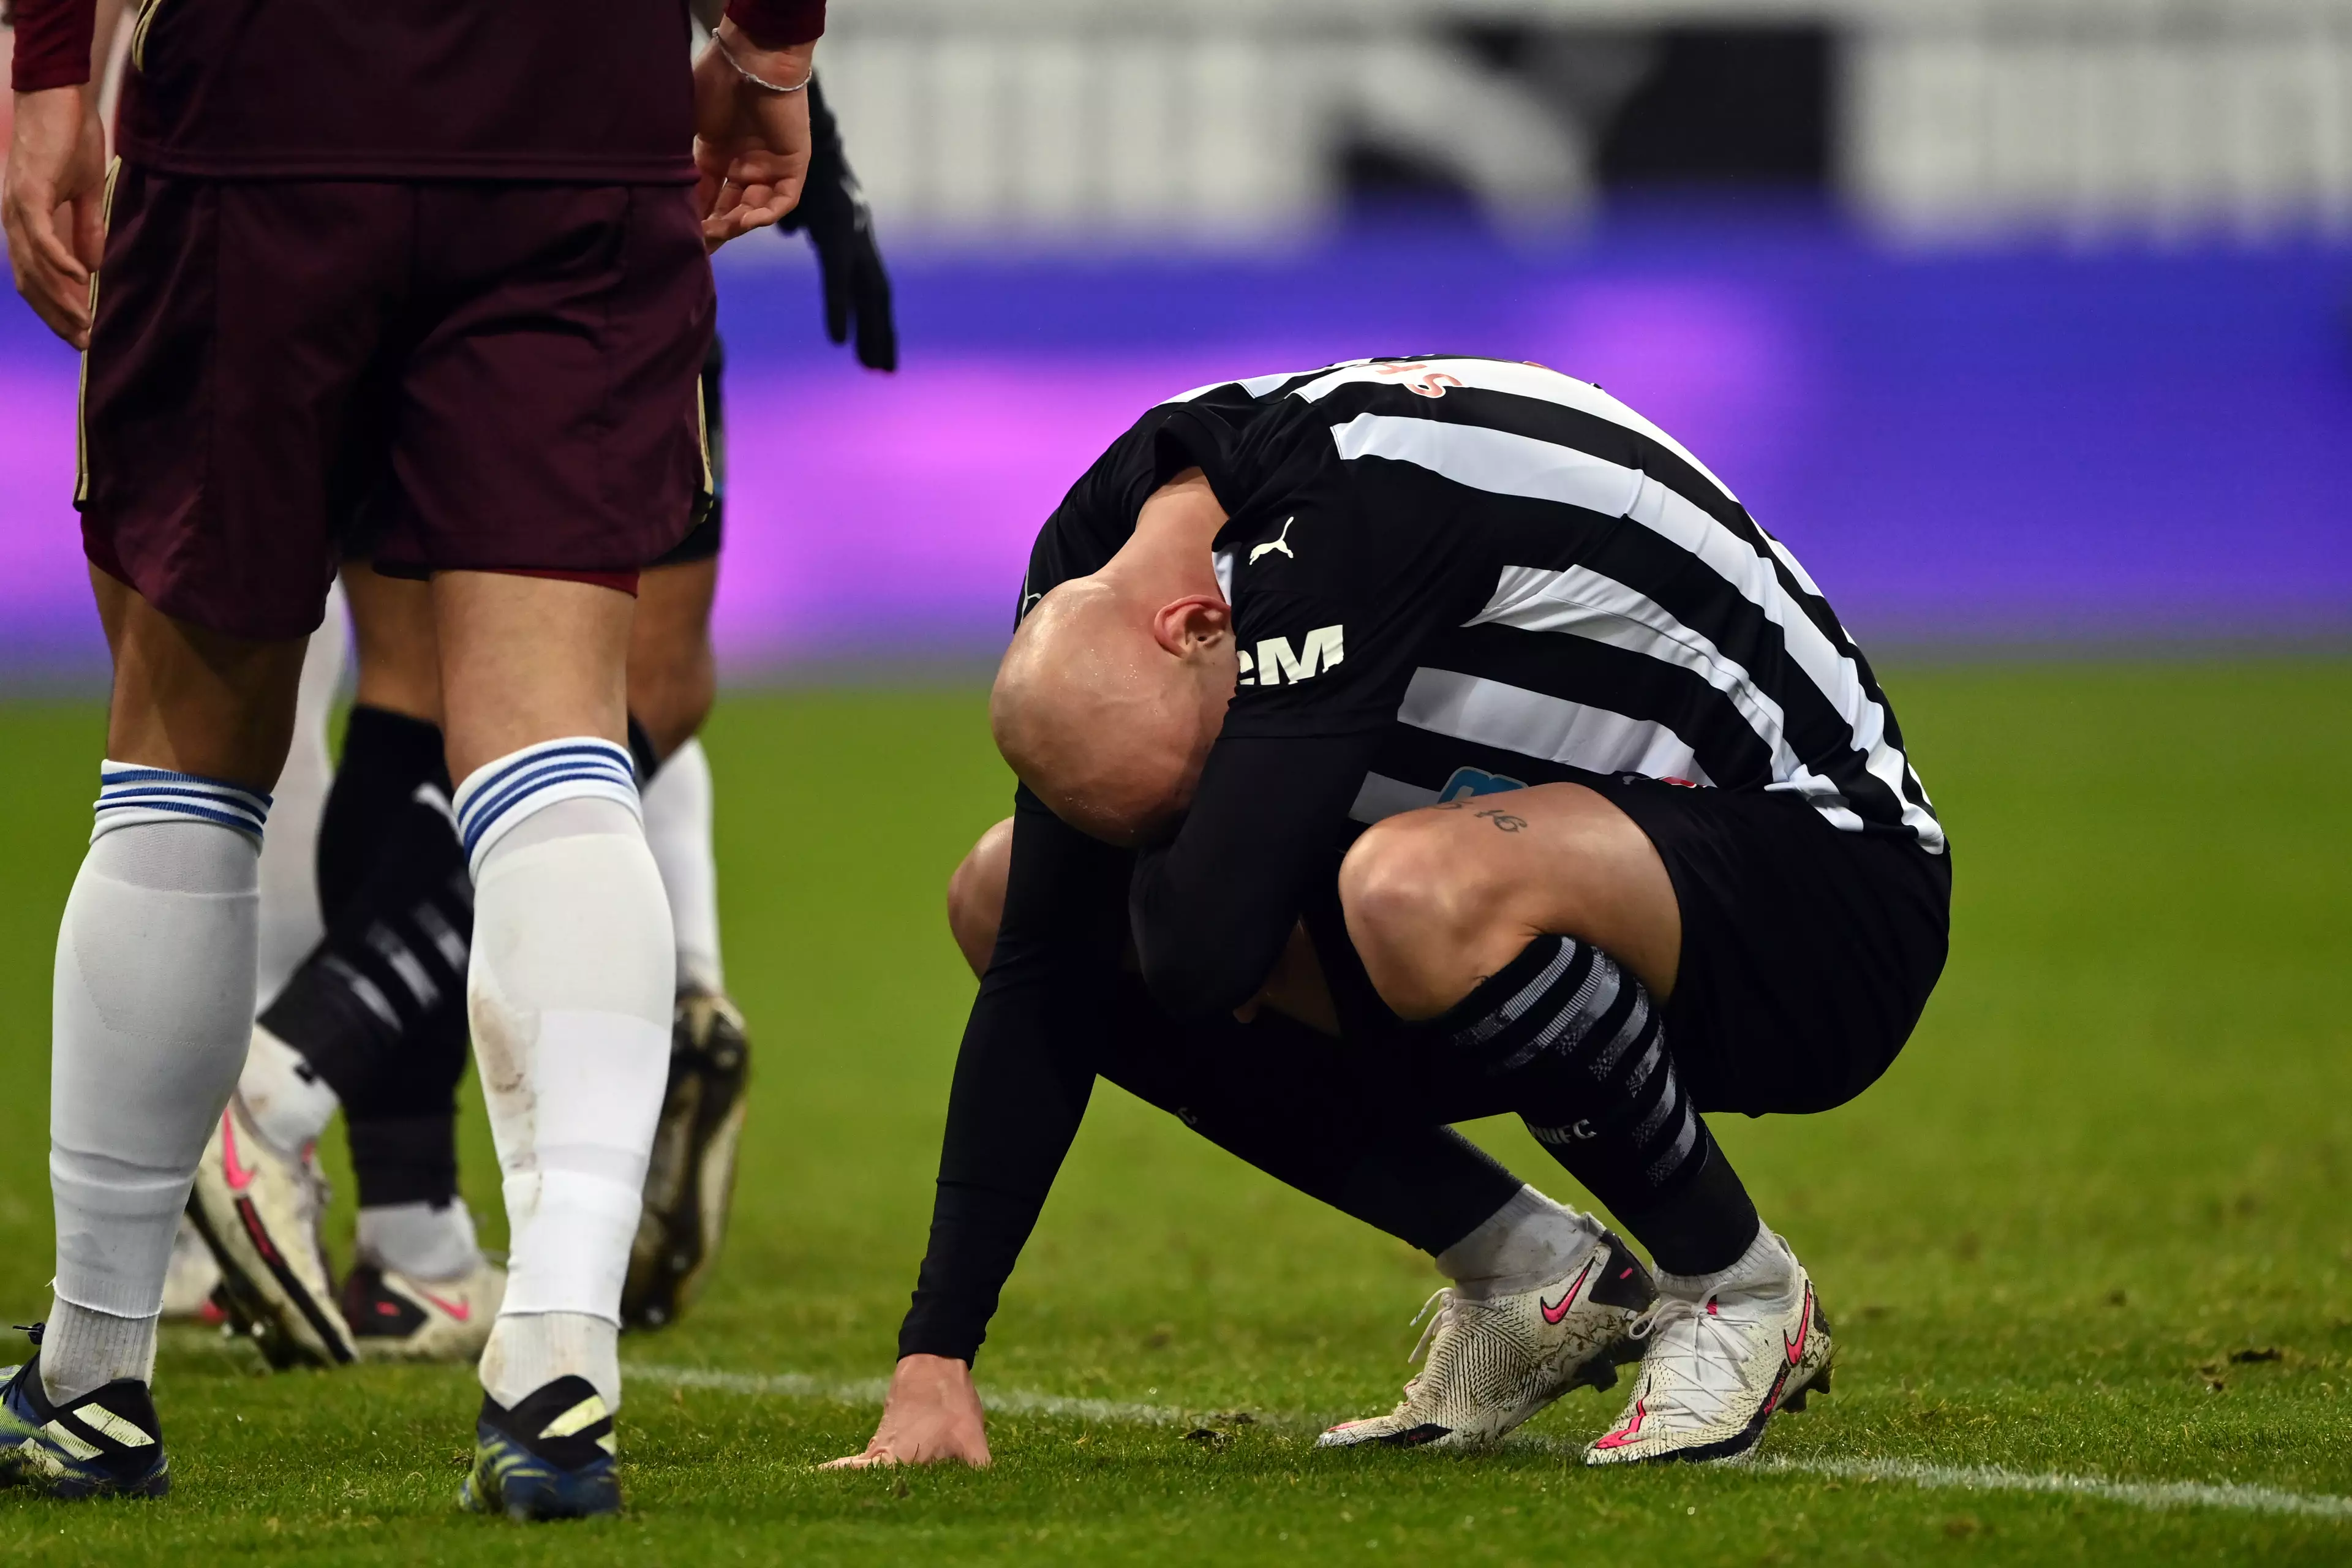 Shelvey clearly struggled against Bielsa's team. Image: PA Images